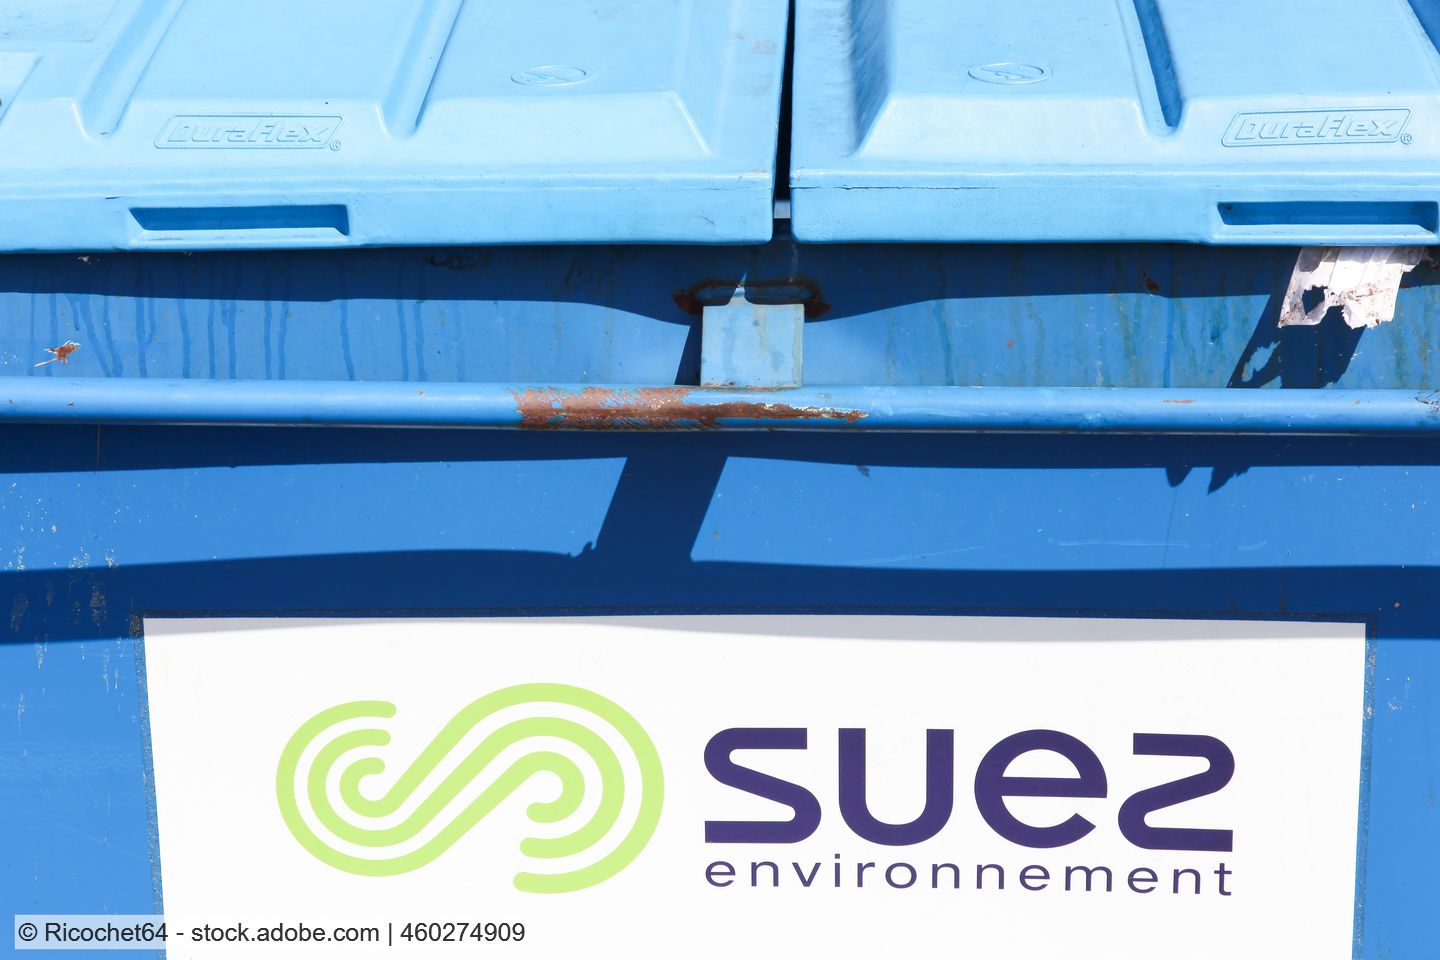 Suez posts significant growth in waste management revenue